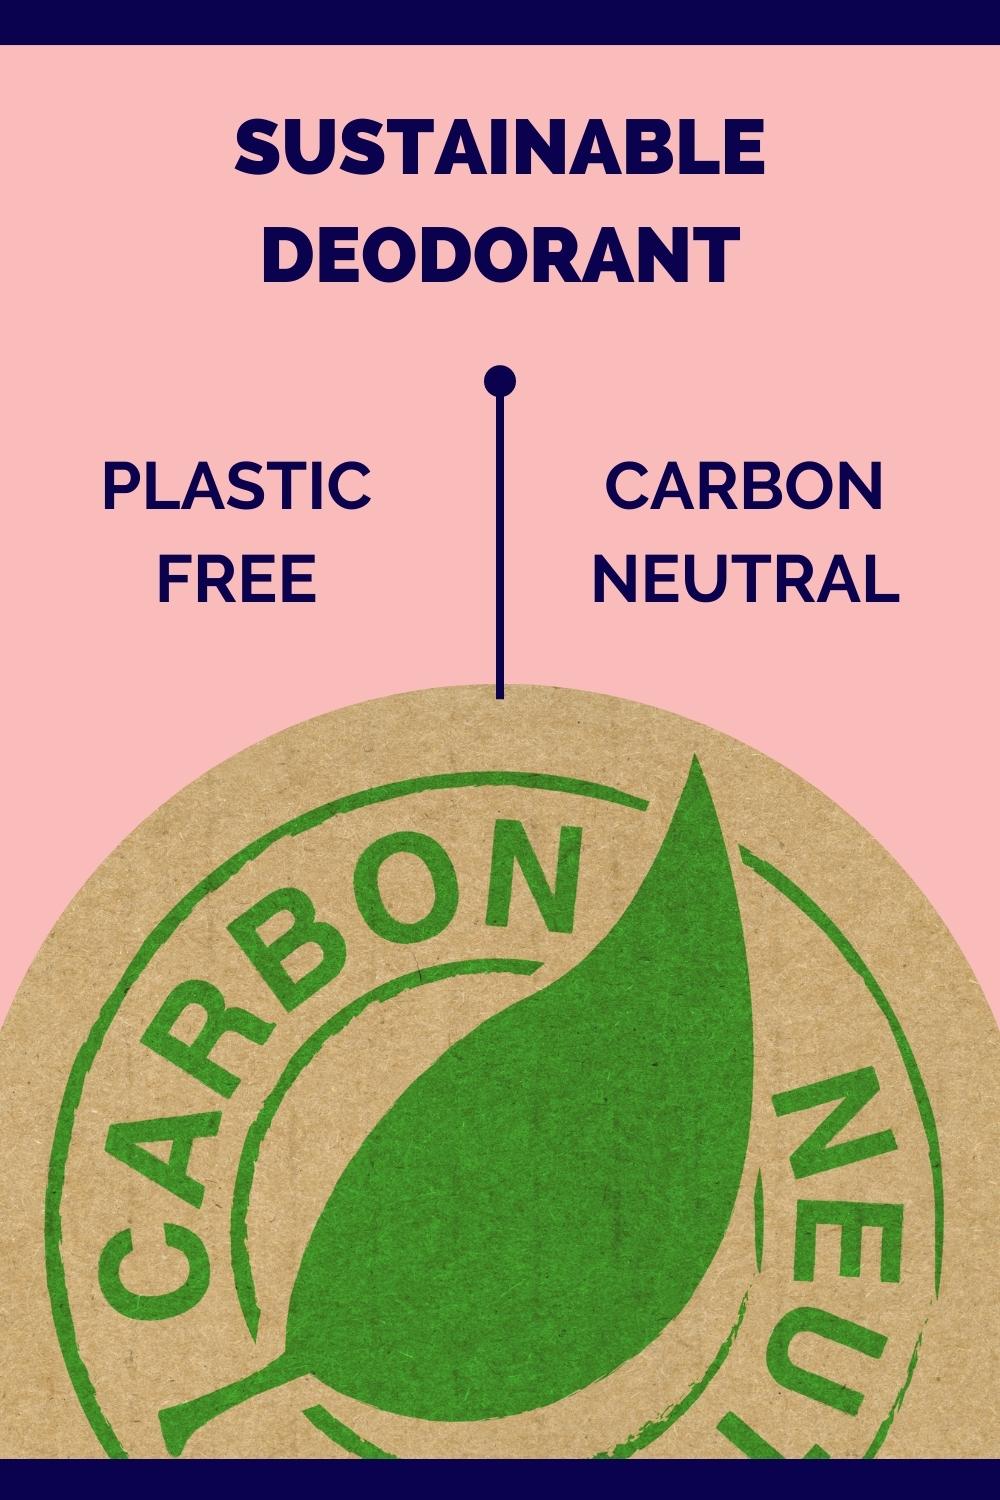 Carbon neutral stamp